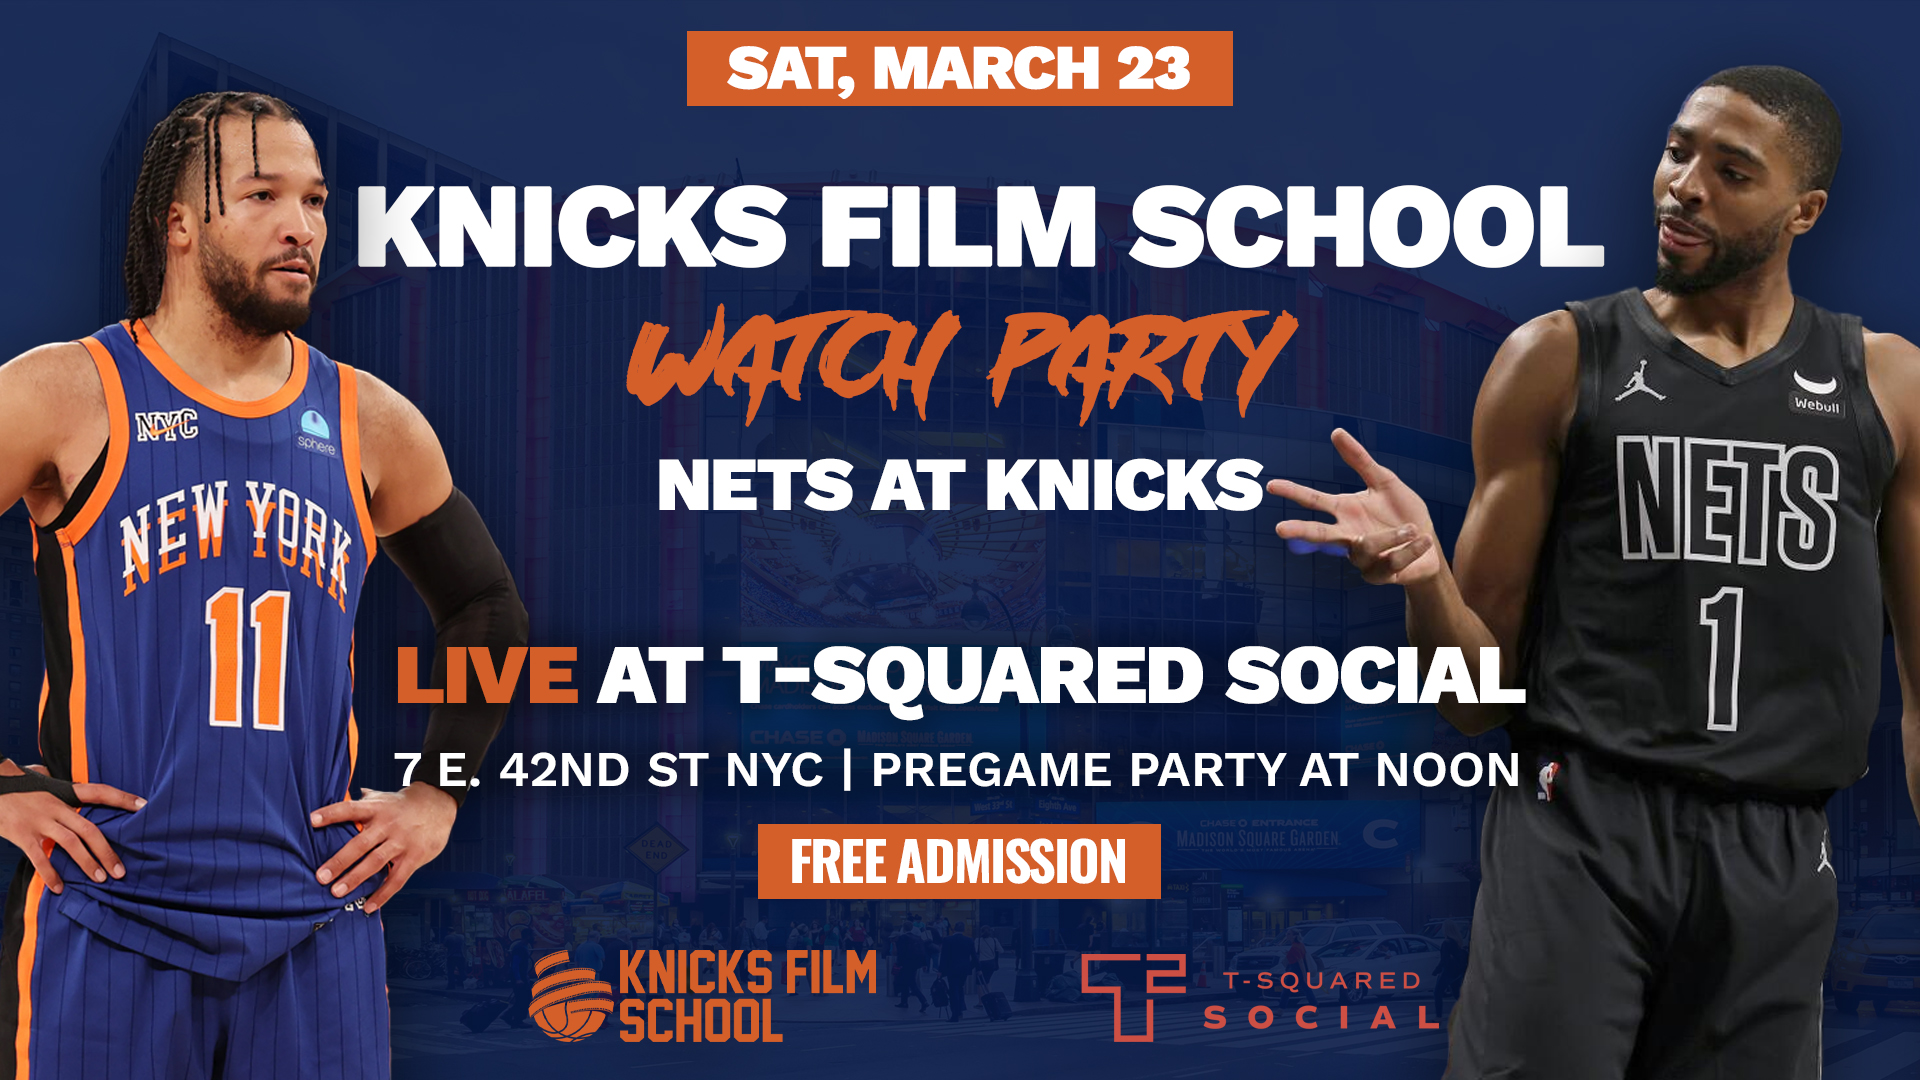 Knicks Film School on X: TODAY IS THE DAY!!! See you all at T